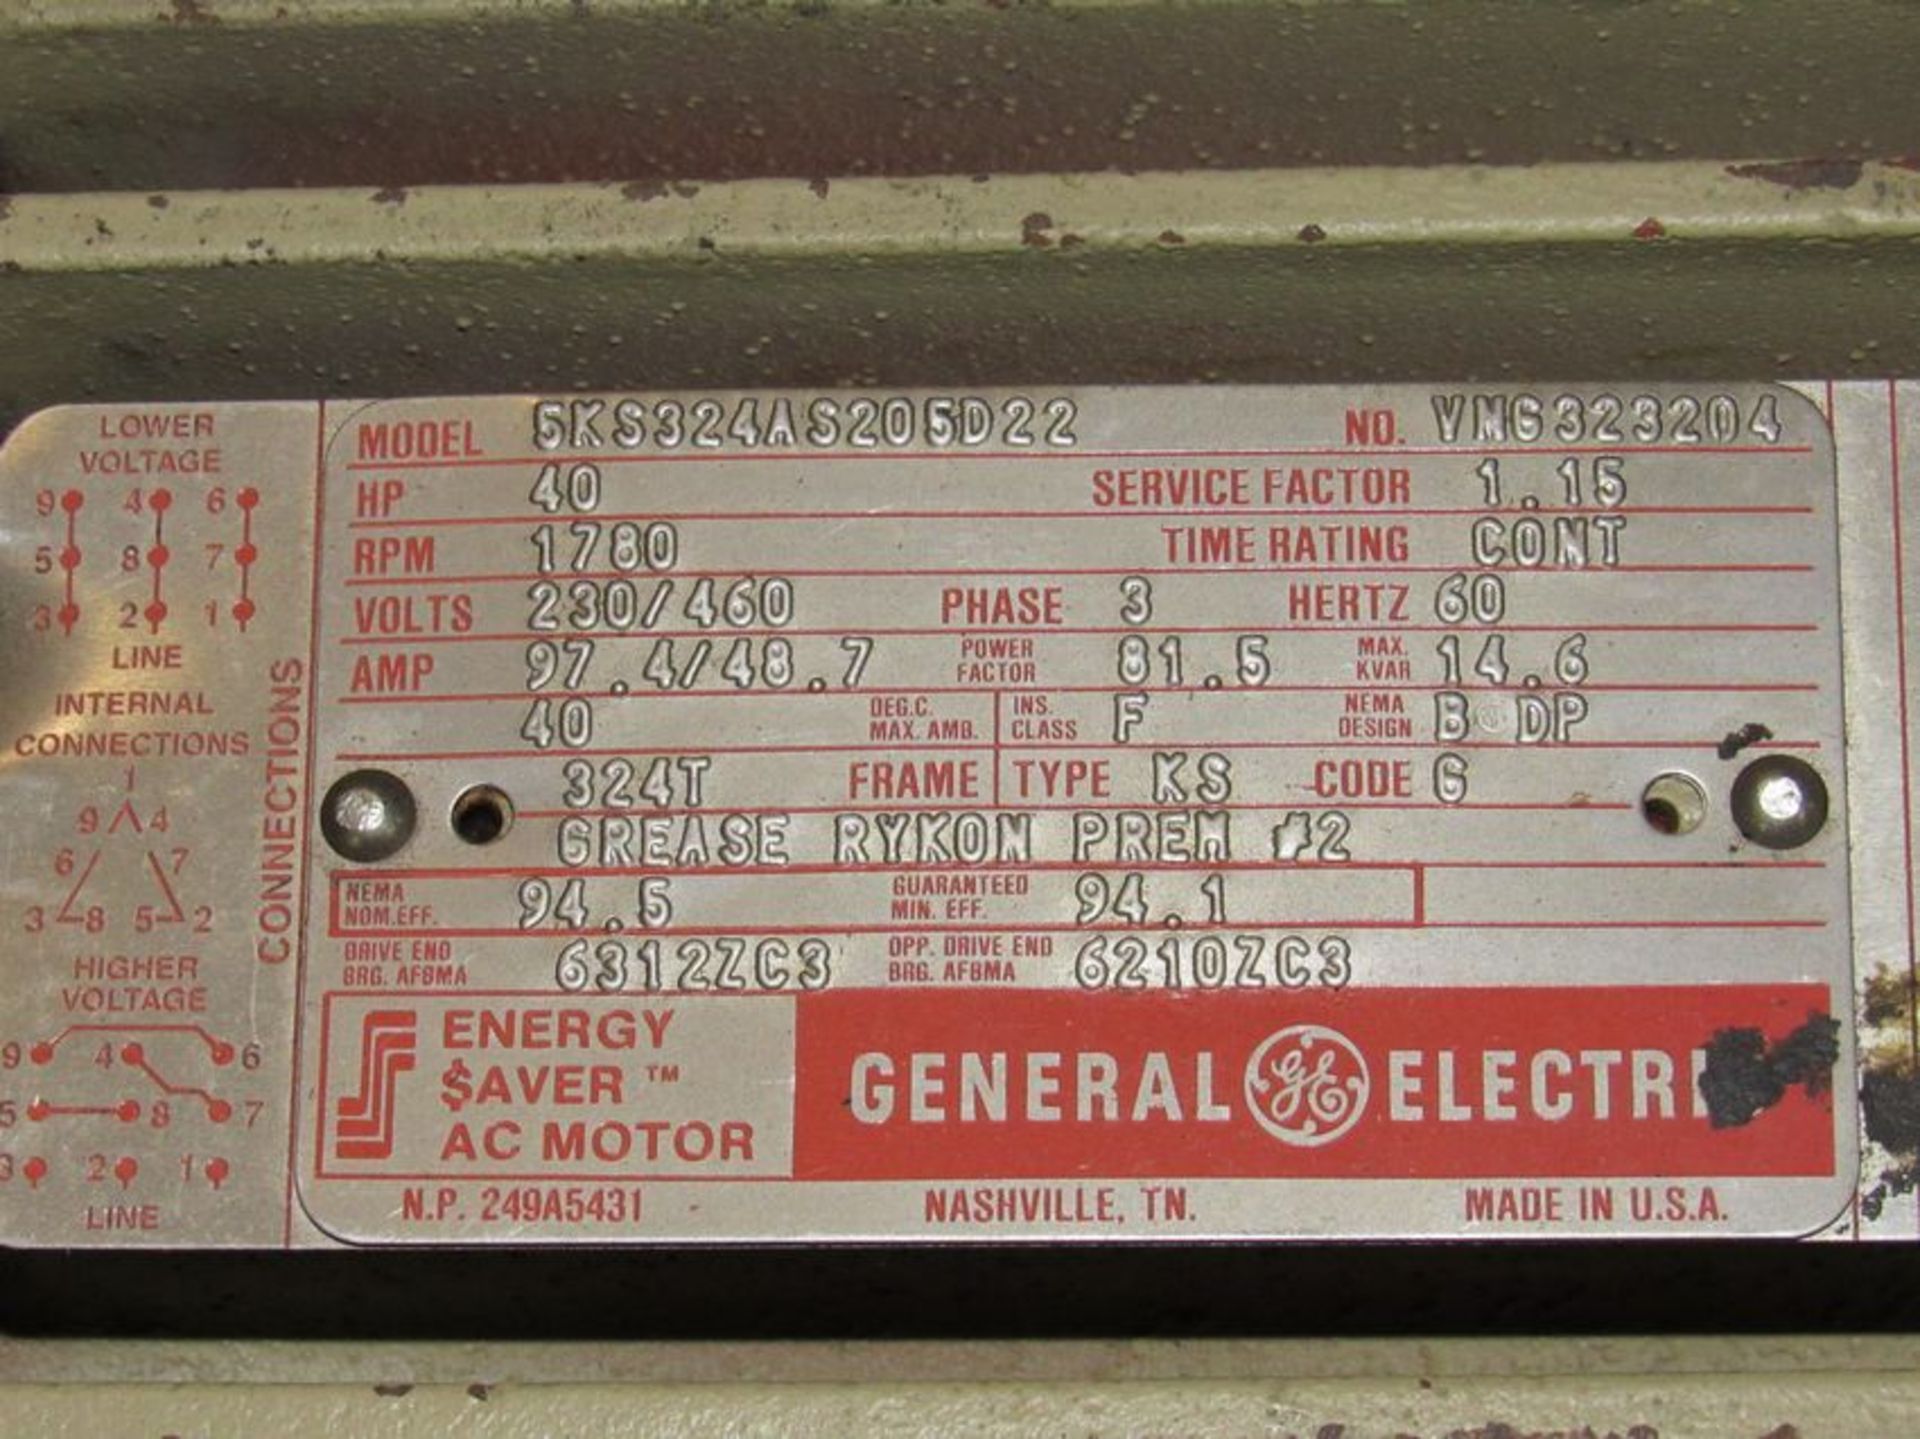 40-HP GE Energy Saver High Speed Electric Motor Model #5KS324AS205D22, 230/460 Volts, 97.4/48.7 - Image 2 of 4